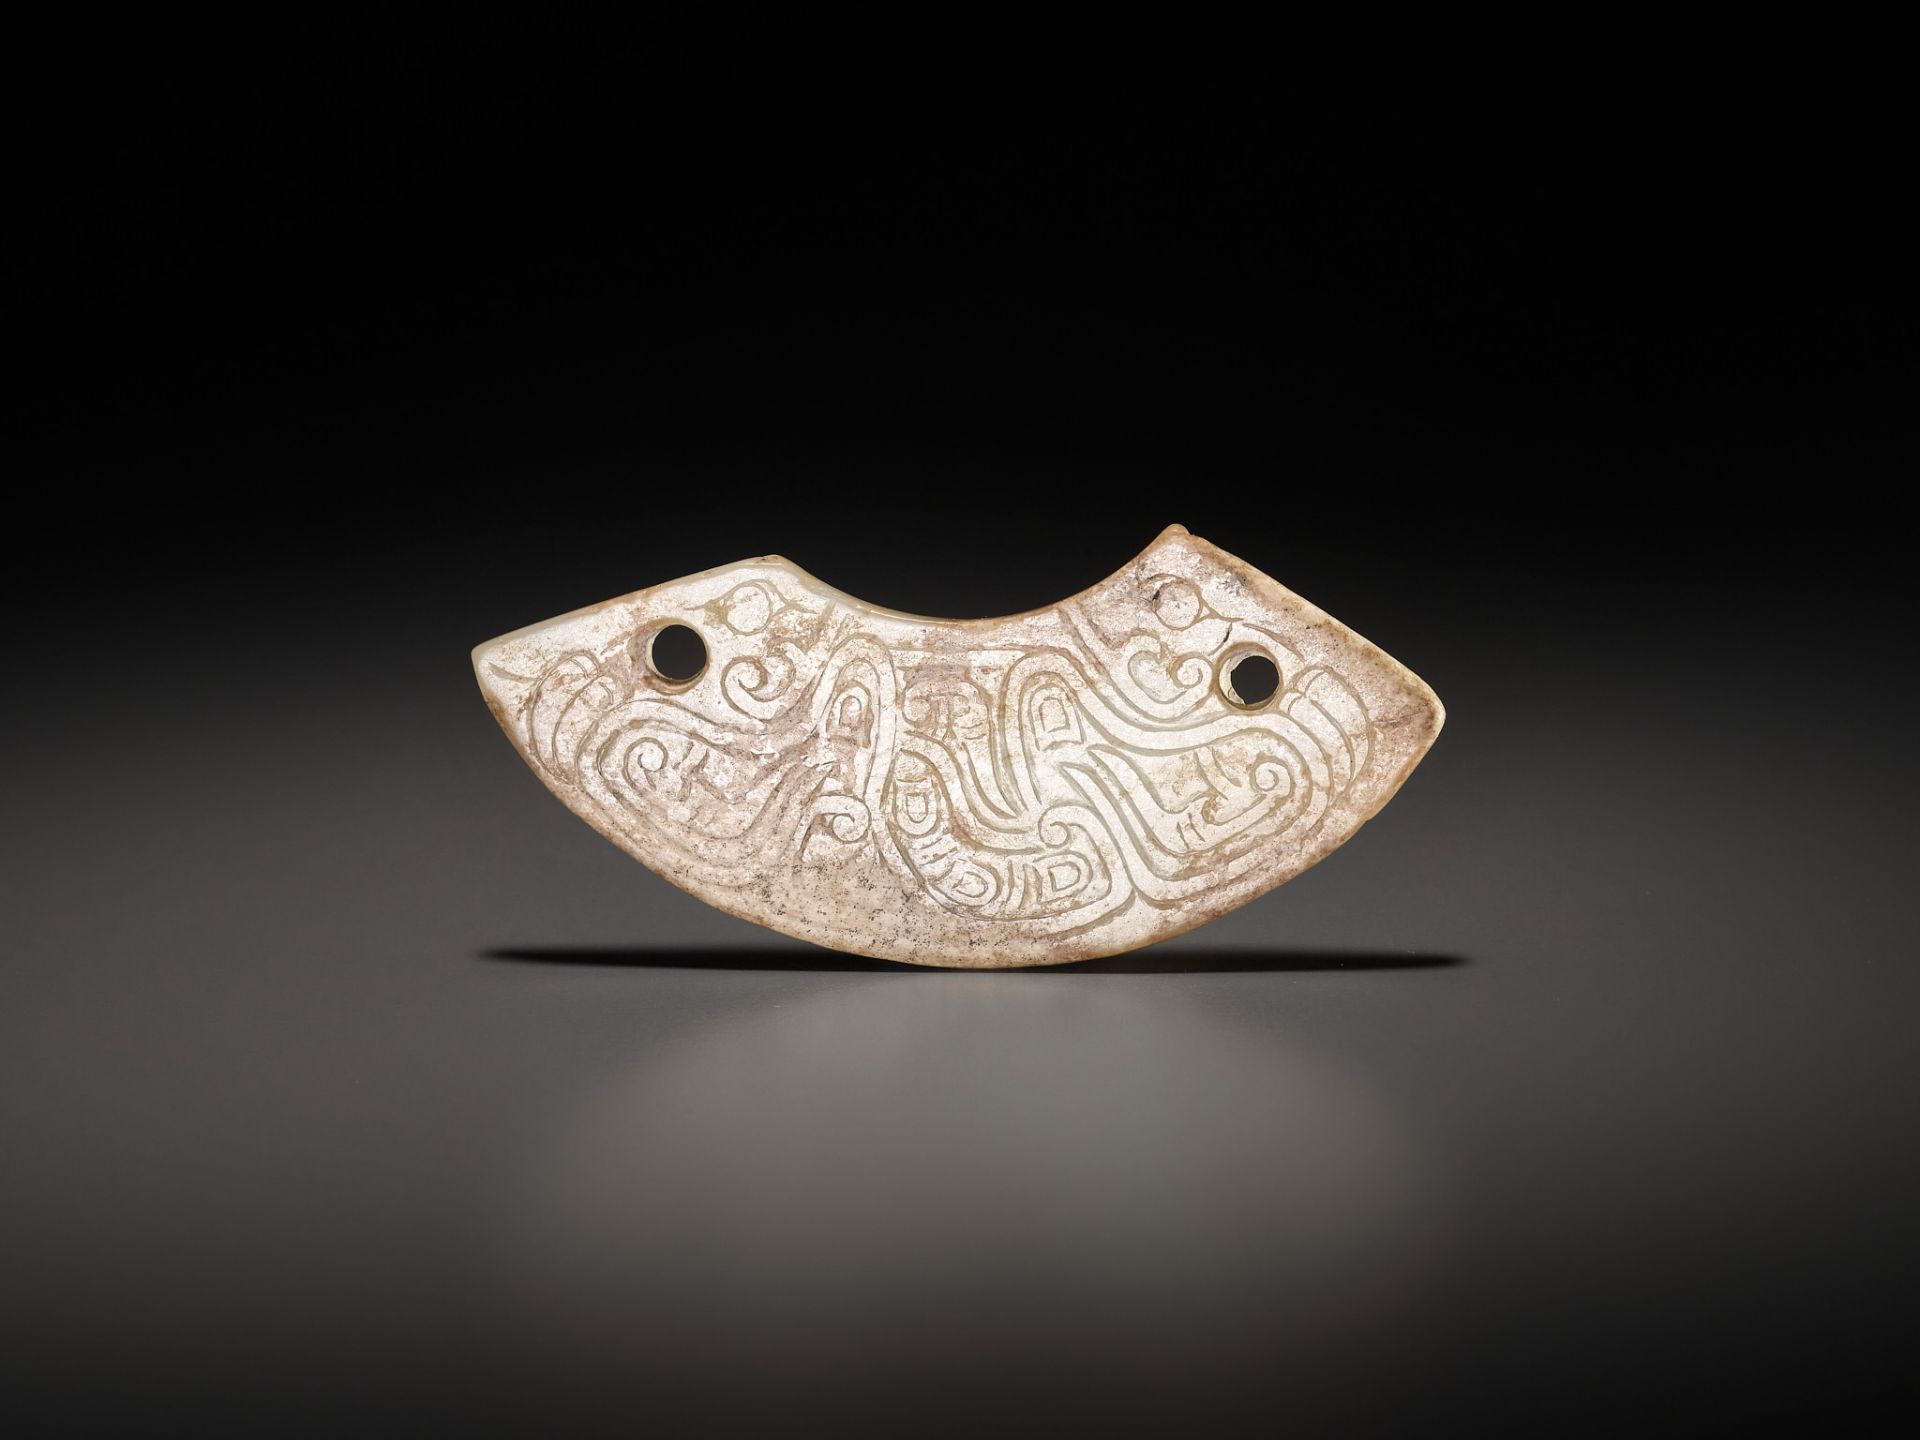 A JADE 'DRAGON' PENDANT, HUANG, WESTERN ZHOU DYNASTY - Image 10 of 16